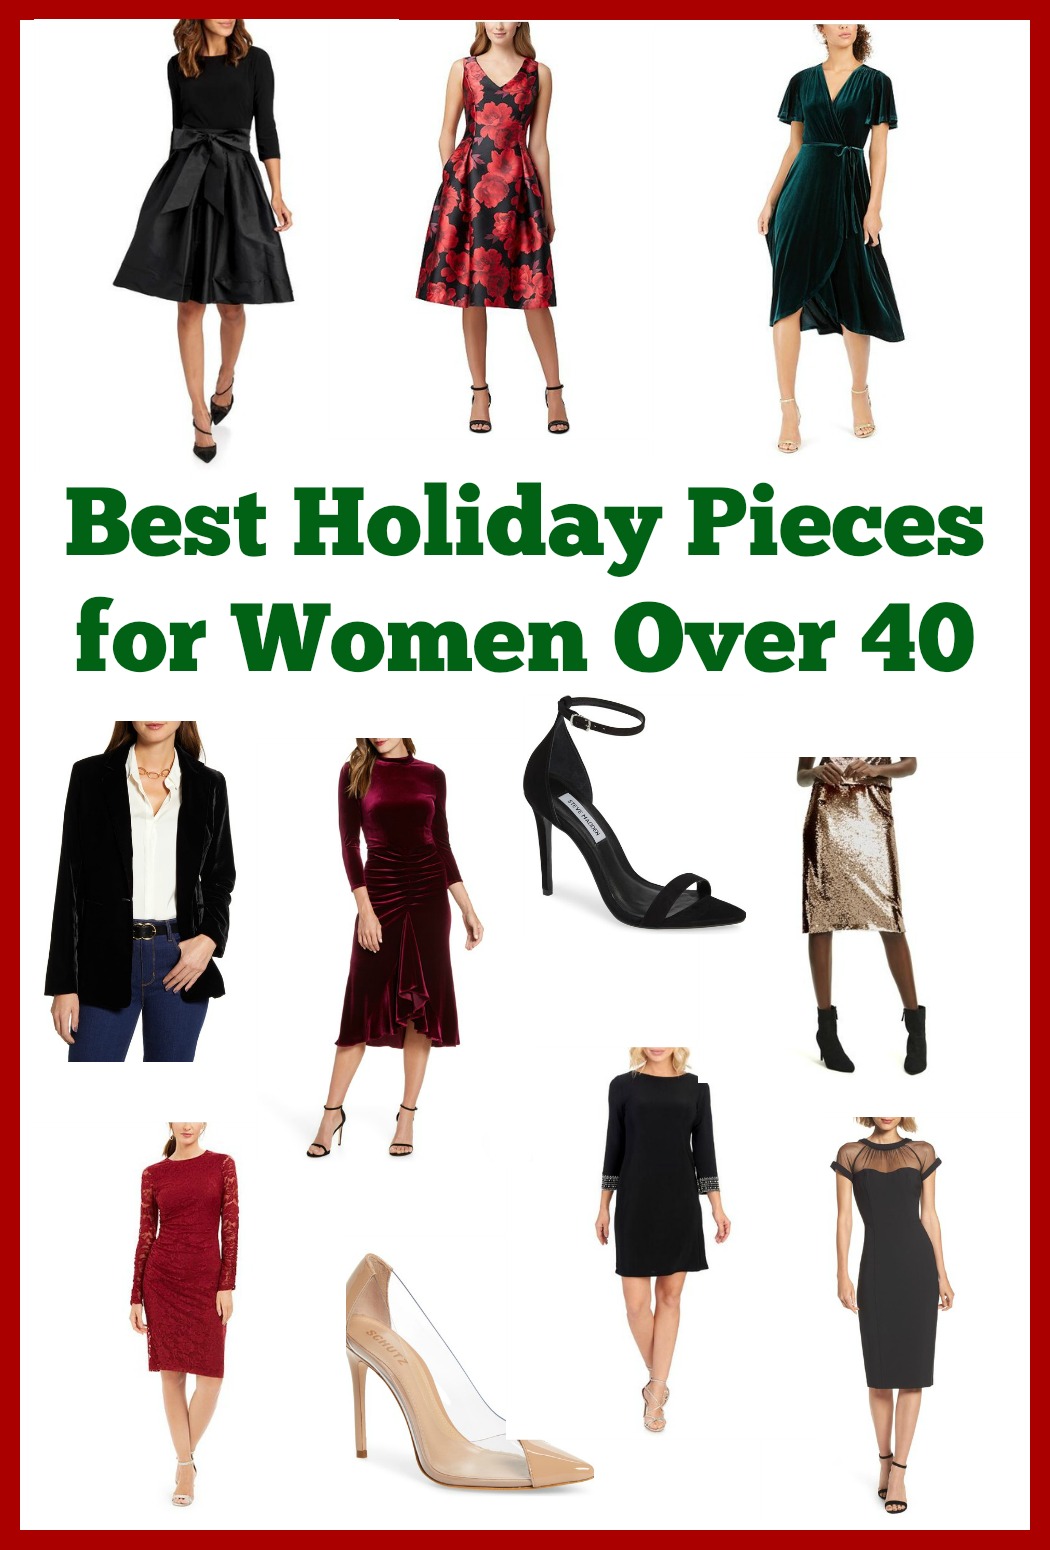 The Best Holiday Pieces for Women Over 40 - Daily Dose of Style